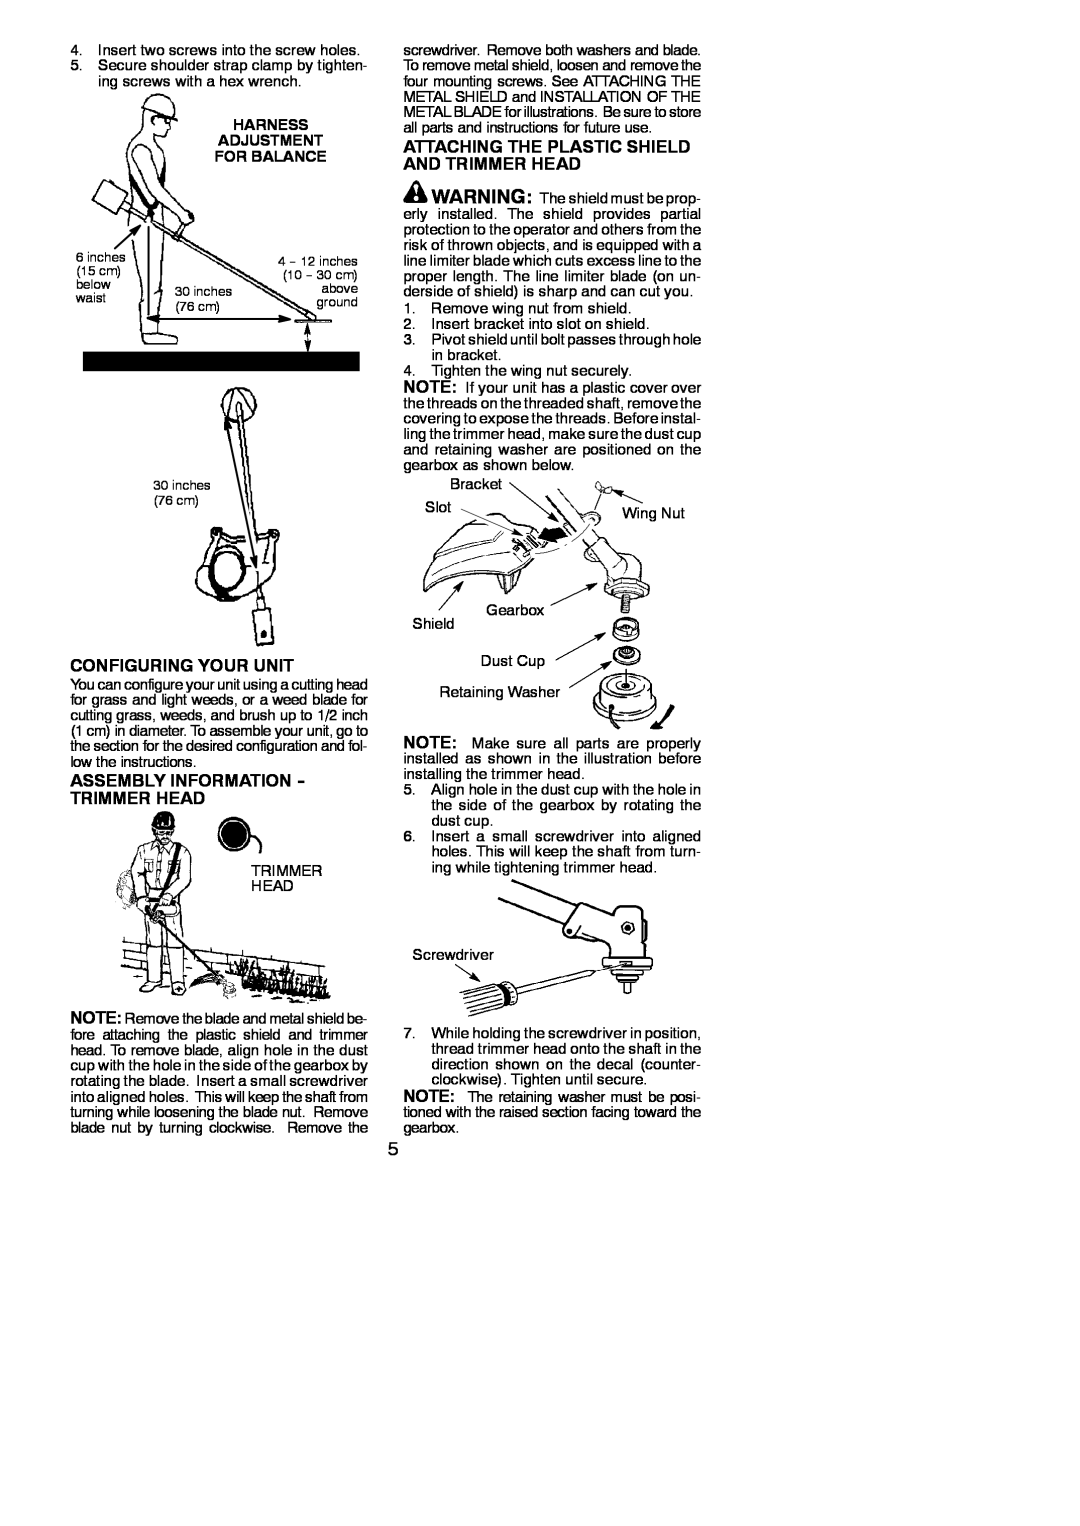 Weed Eater 530165748-01, BC3150 instruction manual Attaching The Plastic Shield And Trimmer Head, Configuring Your Unit 